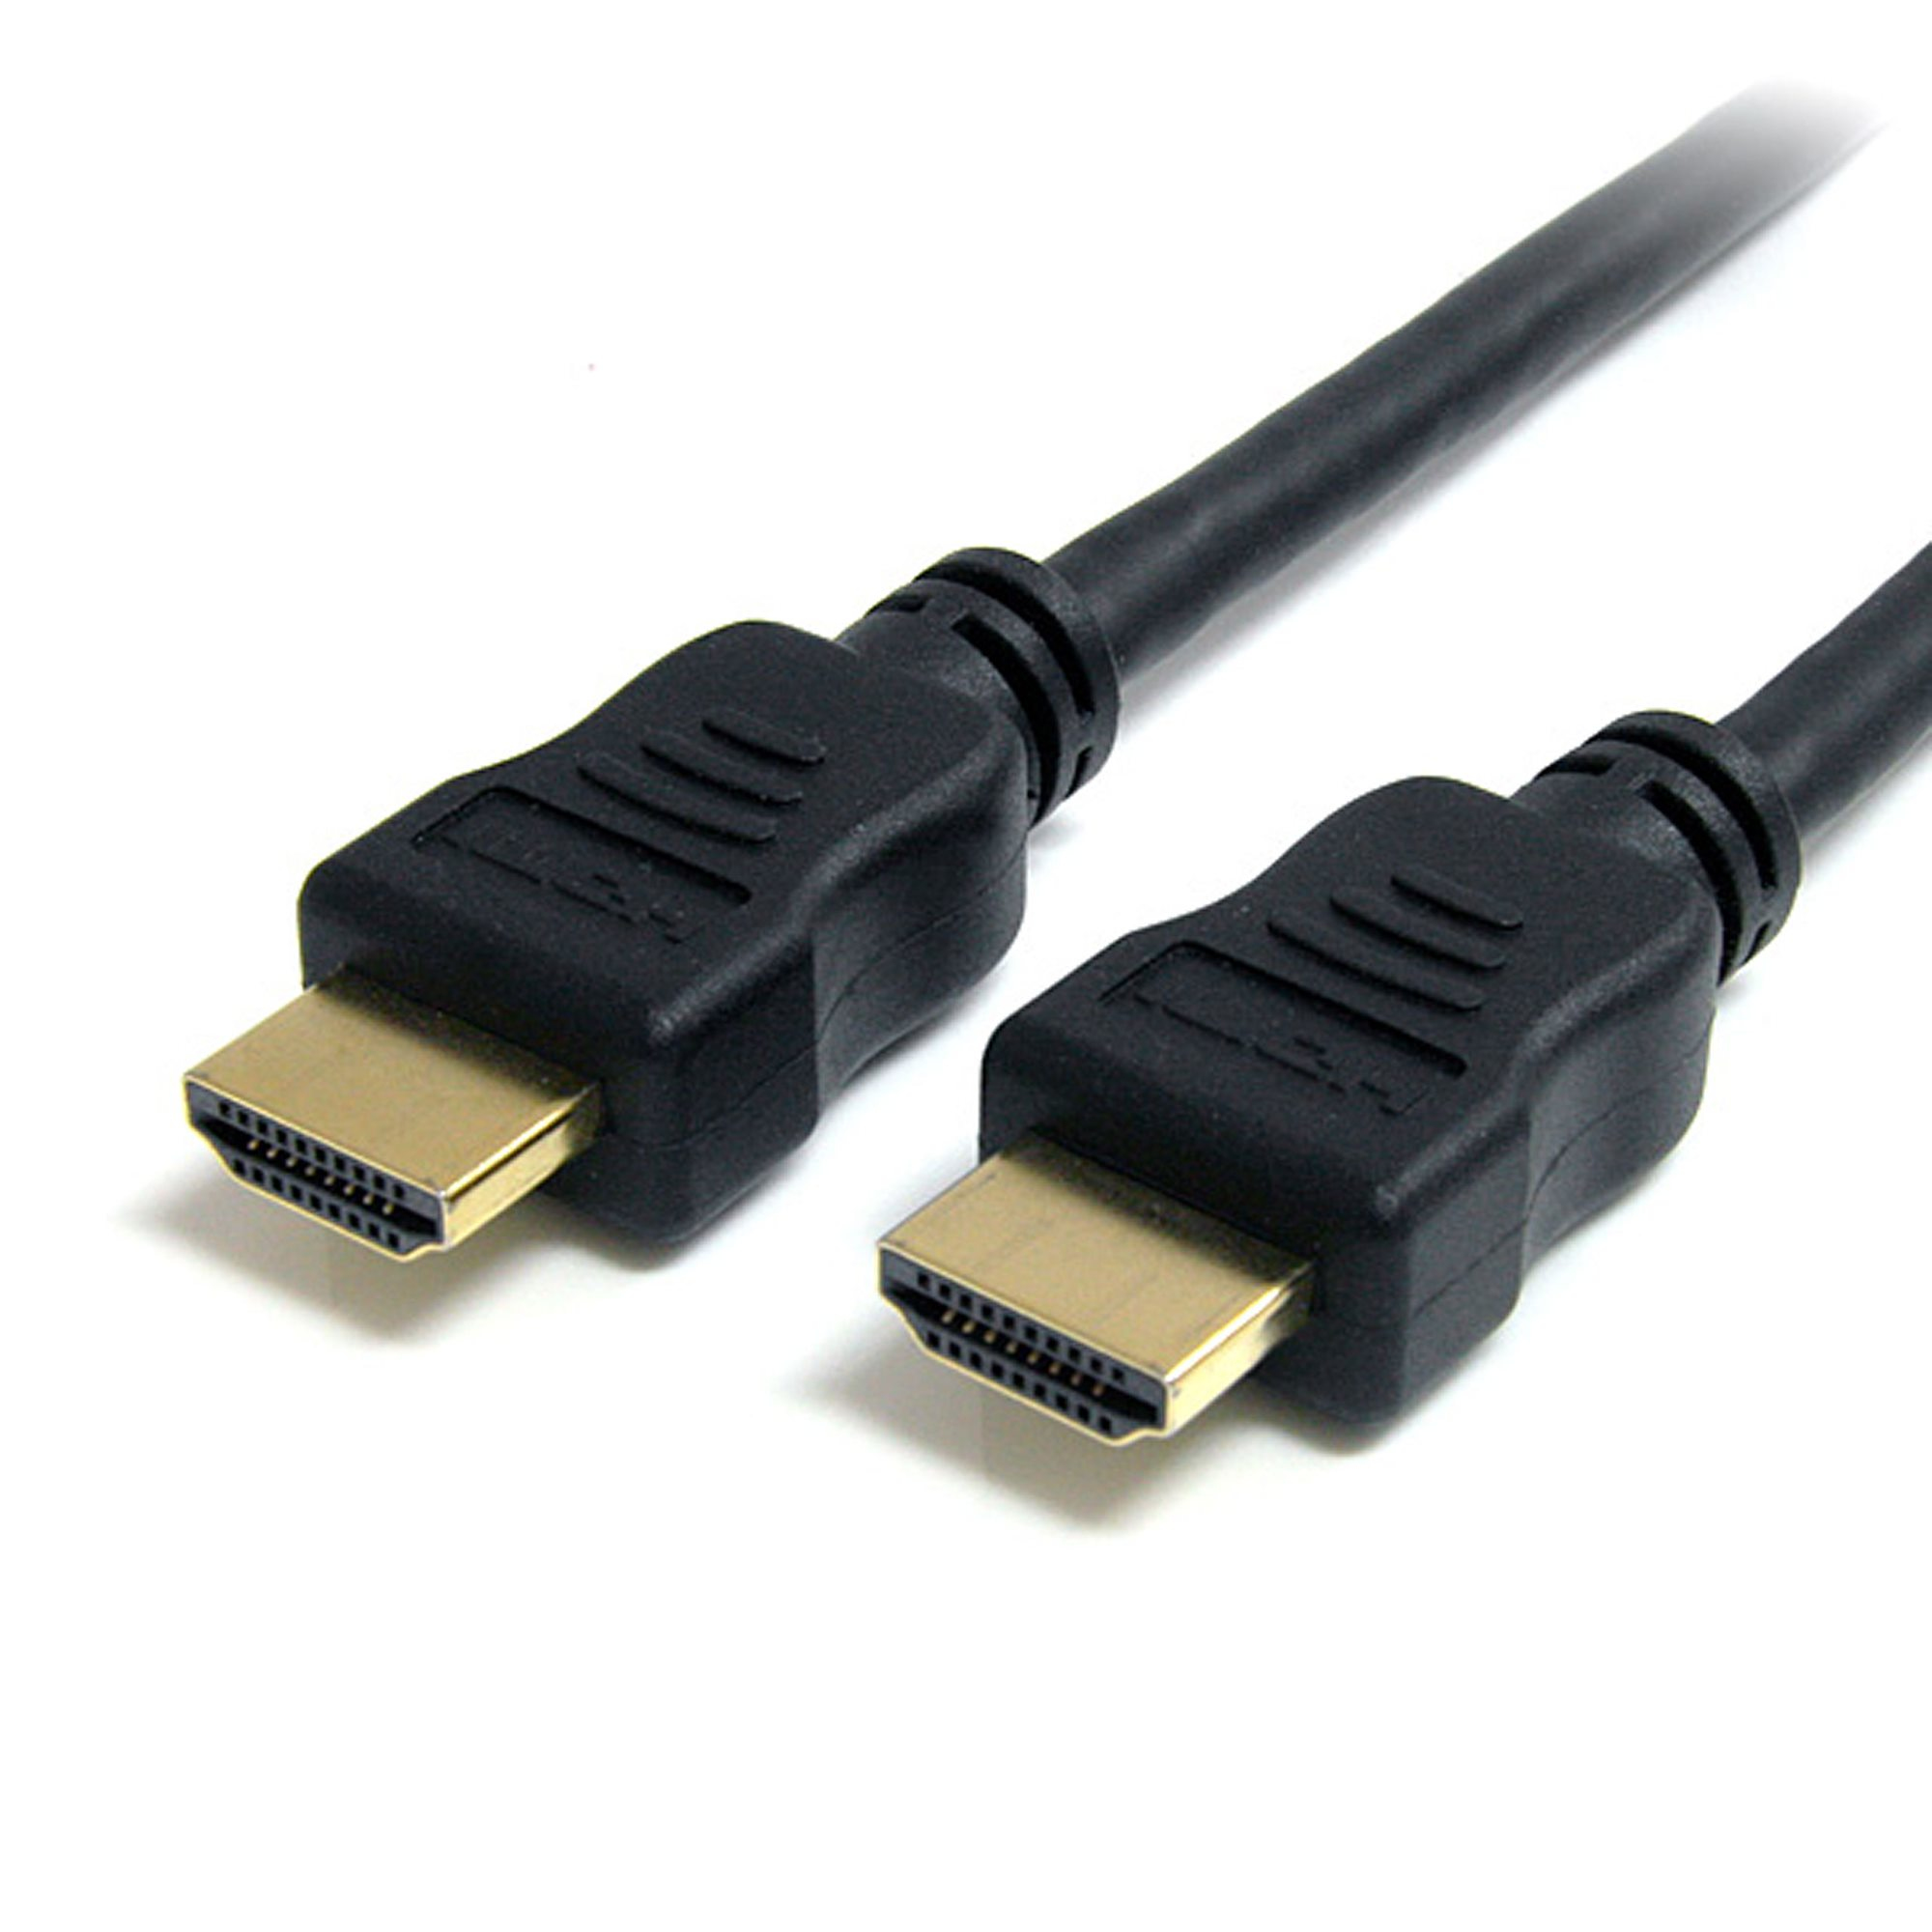 StarTech.com 2m High Speed HDMI Cable W/ Ethernet Ultra HD 4k X 2k - HDMI Cable With Ethernet - HDMI Male To HDMI Male - 2 M - Black HDMM2MHS - C2000